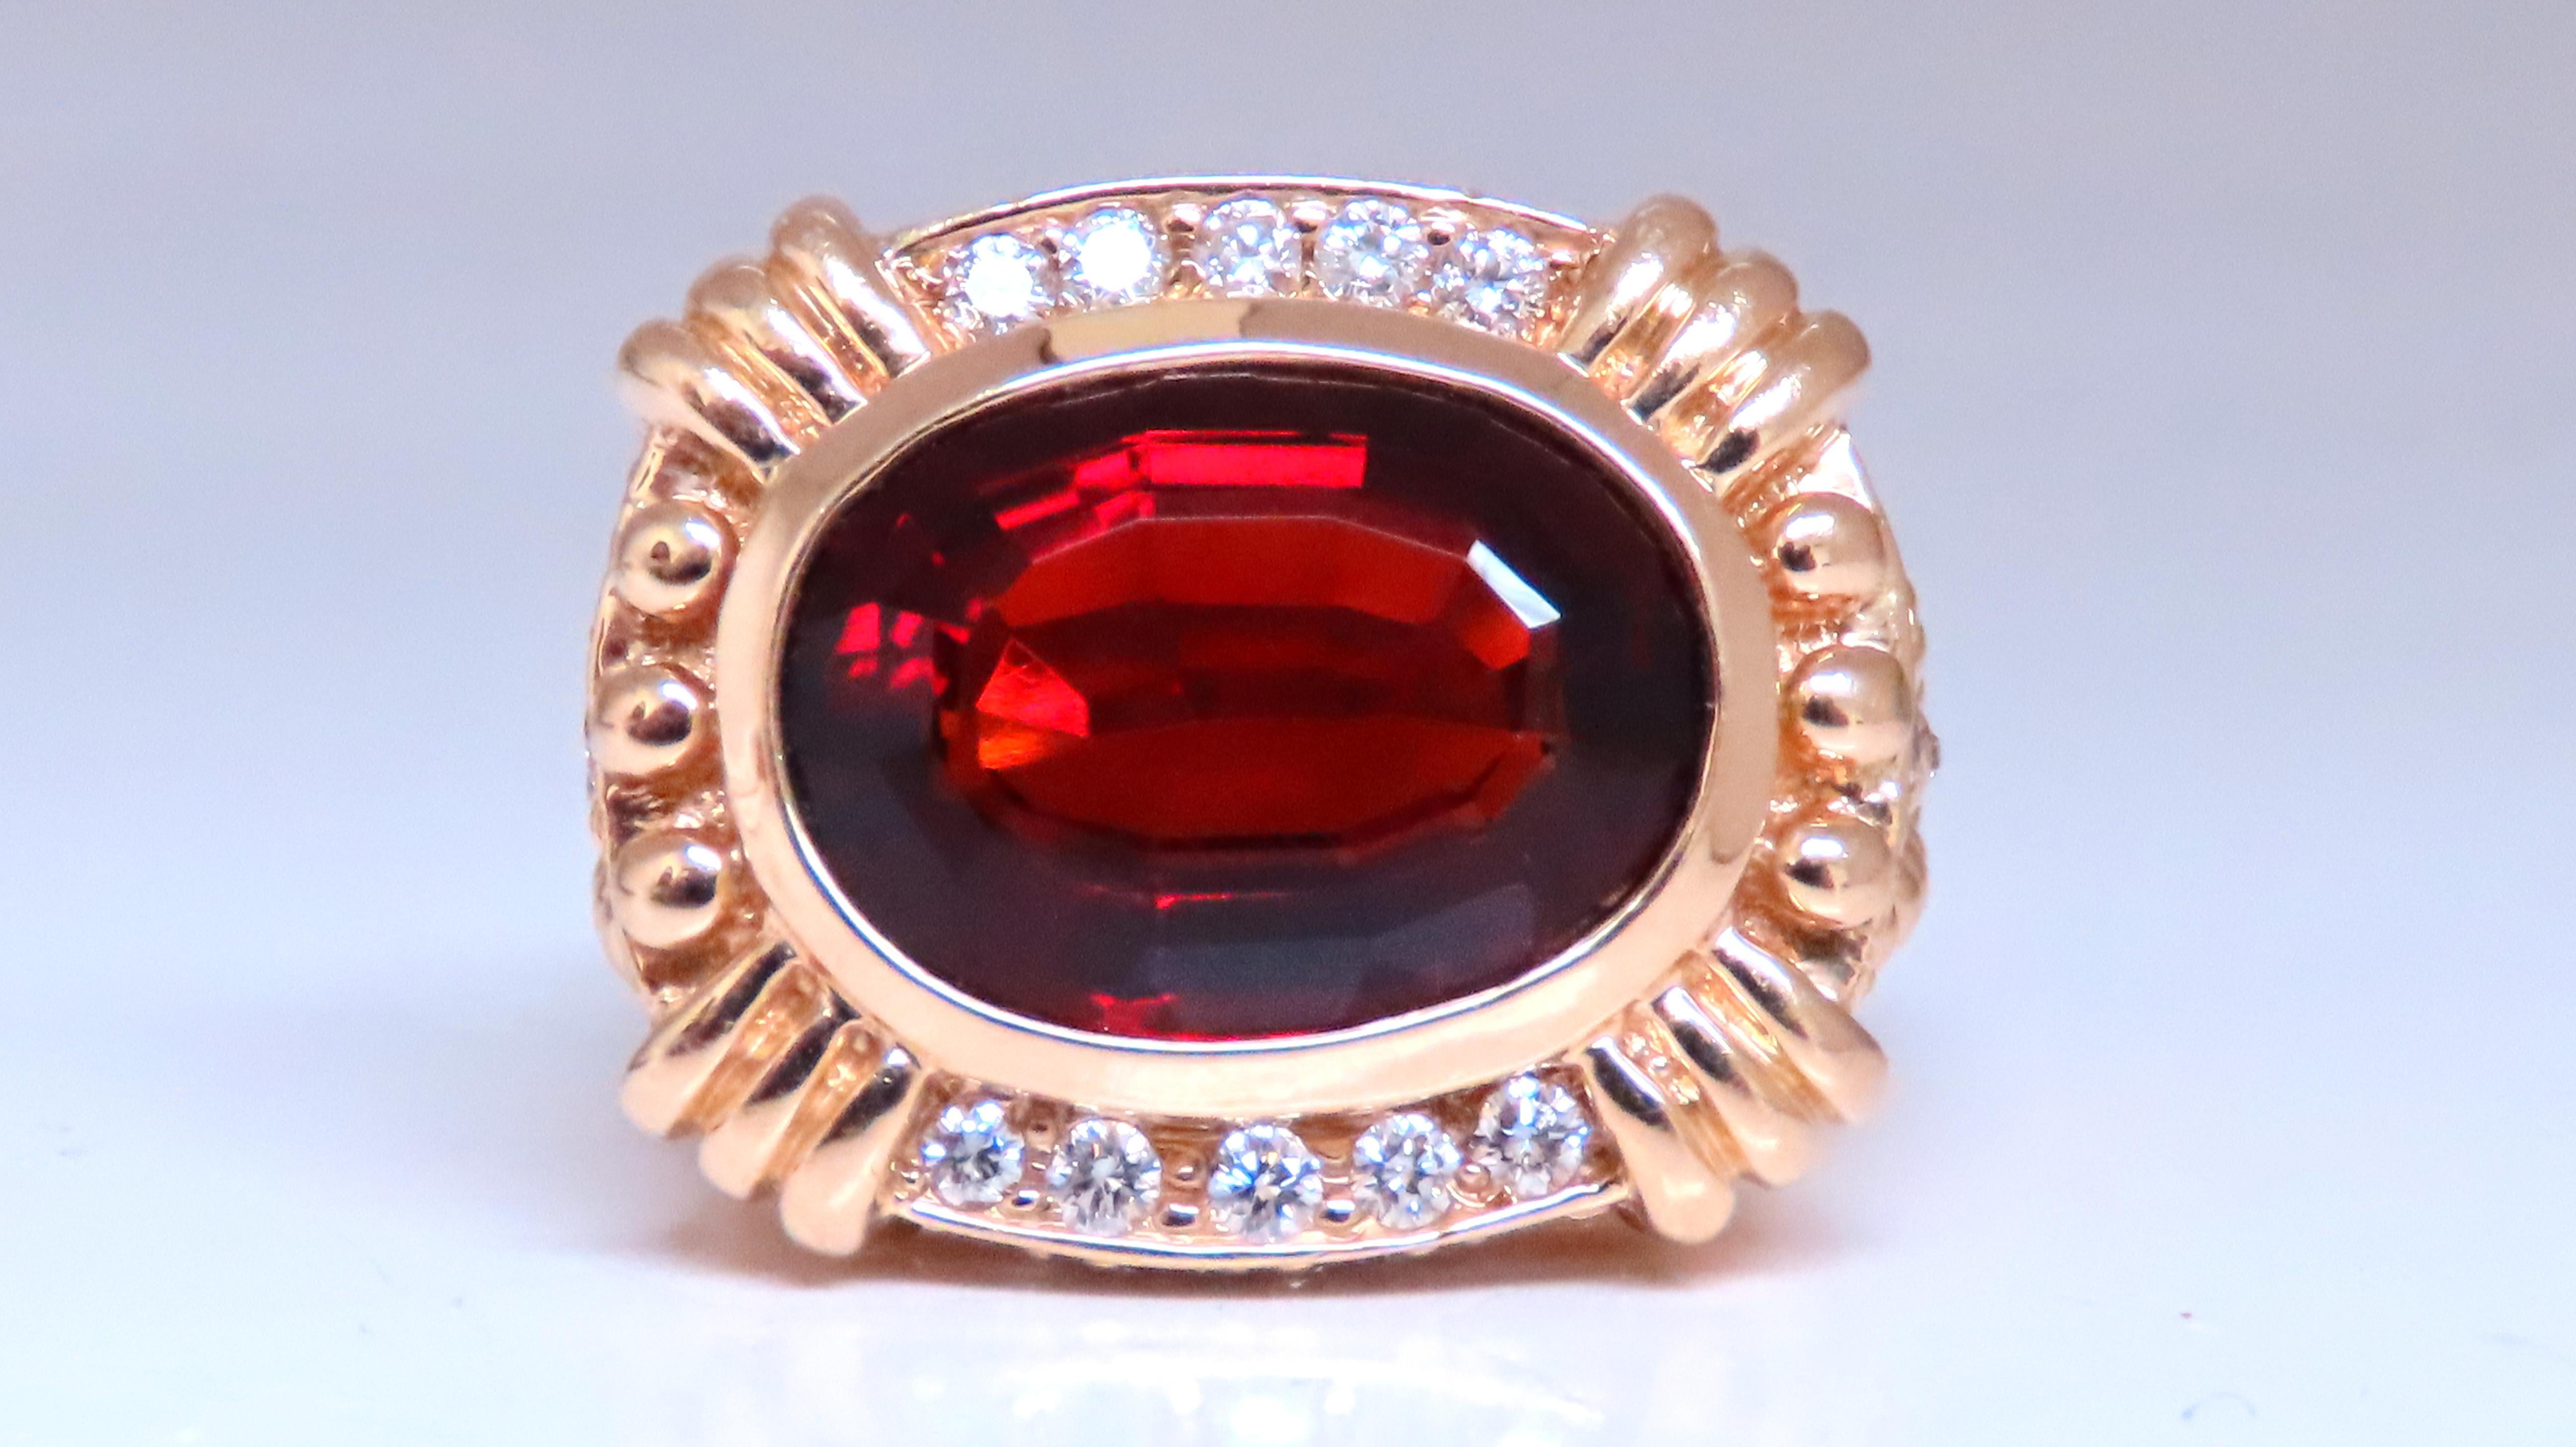 Natural Diamonds Spessartite Cocktail Cluster Ring
15ct Natural Spessartite Garnet
Oval cut, 13 x 9.4mm
Transparent Clean Clarity
1ct Diamonds, Rounds
G-H- color Vs-2 S-1 clarity
14kt yellow gold
13.3 grams
20 x 17mm deck
8mm depth
Size 4.5
$4,000